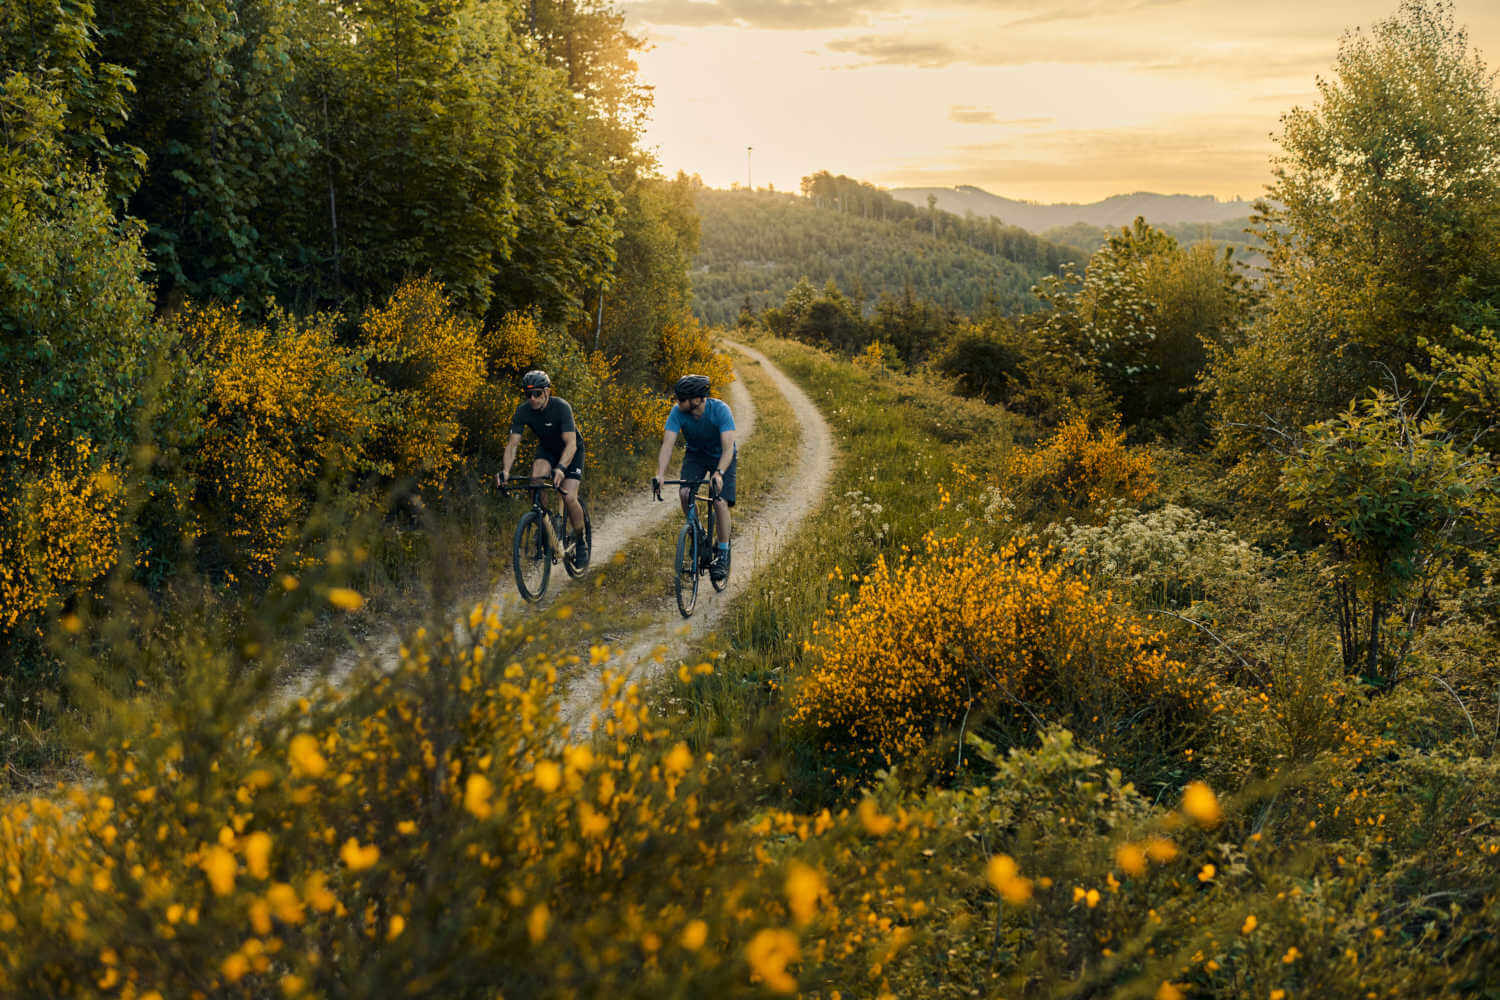 Two mountain bikers ride downhill at the edge of the forest, picturesque landscape in the background